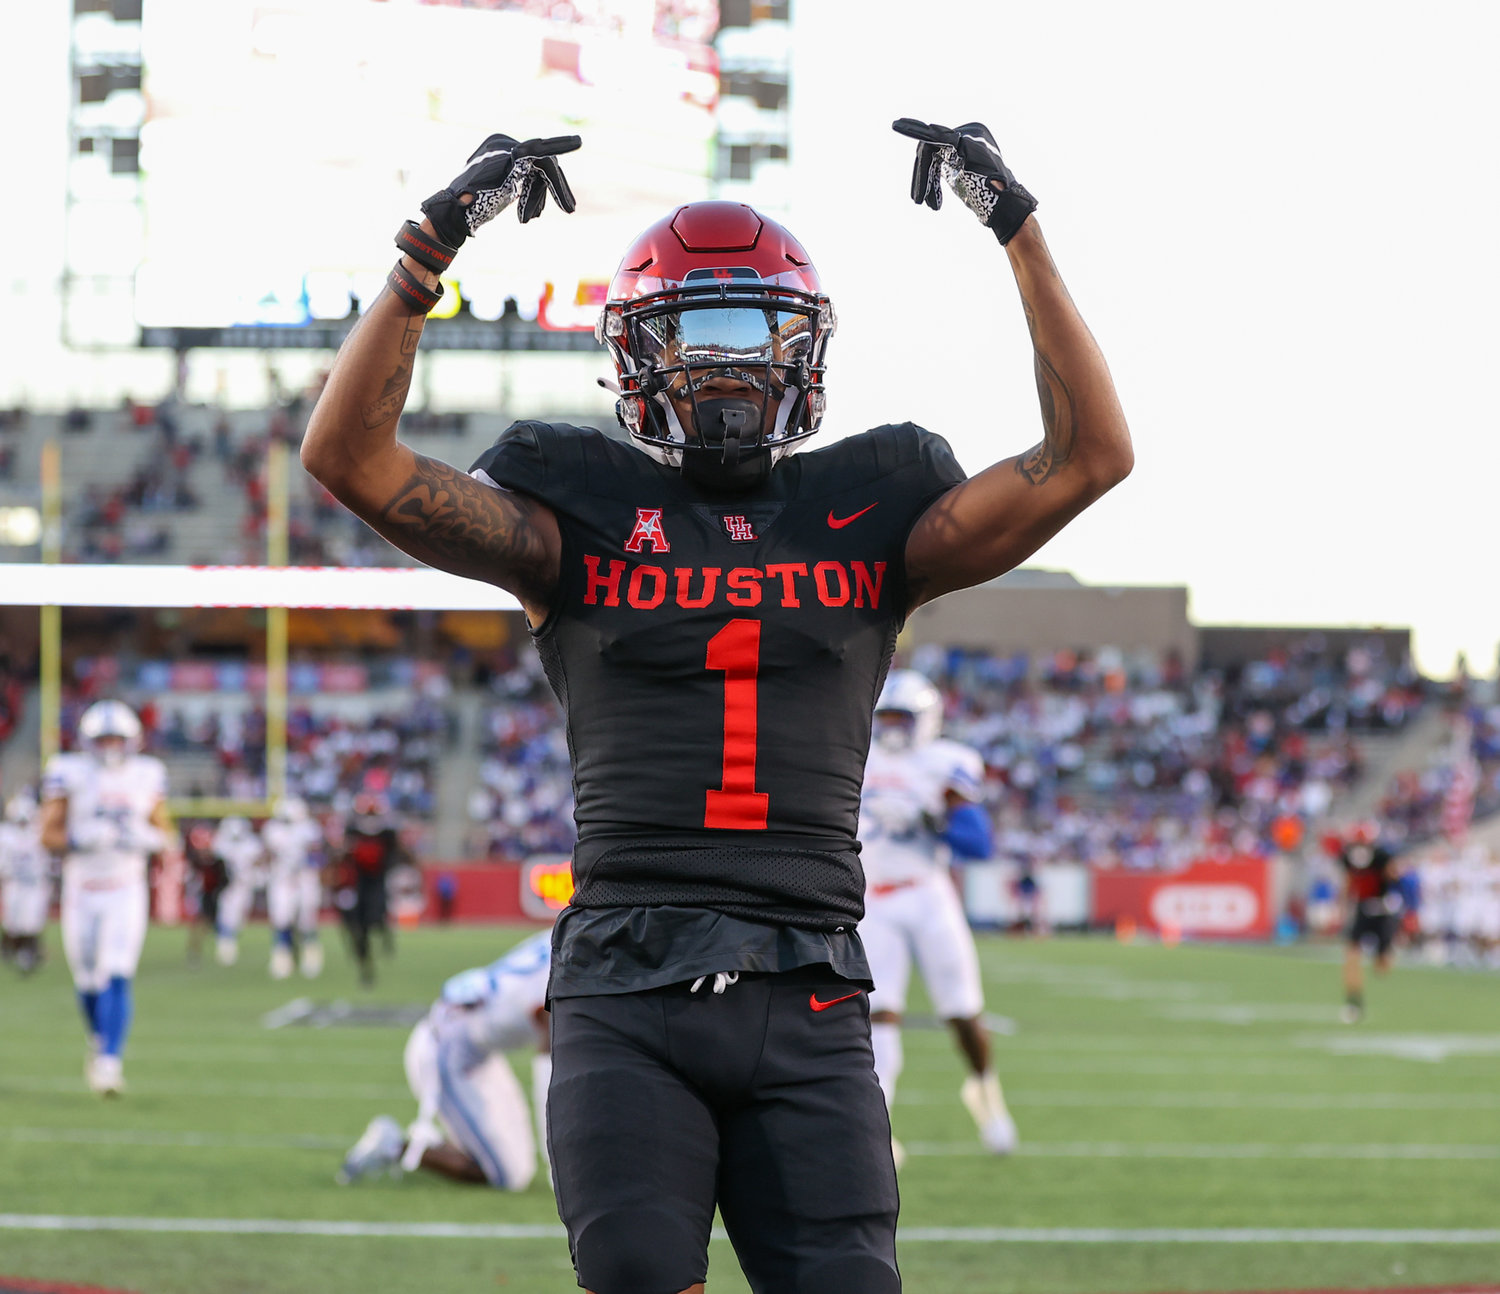 Houston Cougars wide receiver Nathaniel Dell (1) gestures after scoring on a 48-yard touchdown reception during an NCAA football game between Houston and SMU on October 30, 2021 in Houston, Texas.